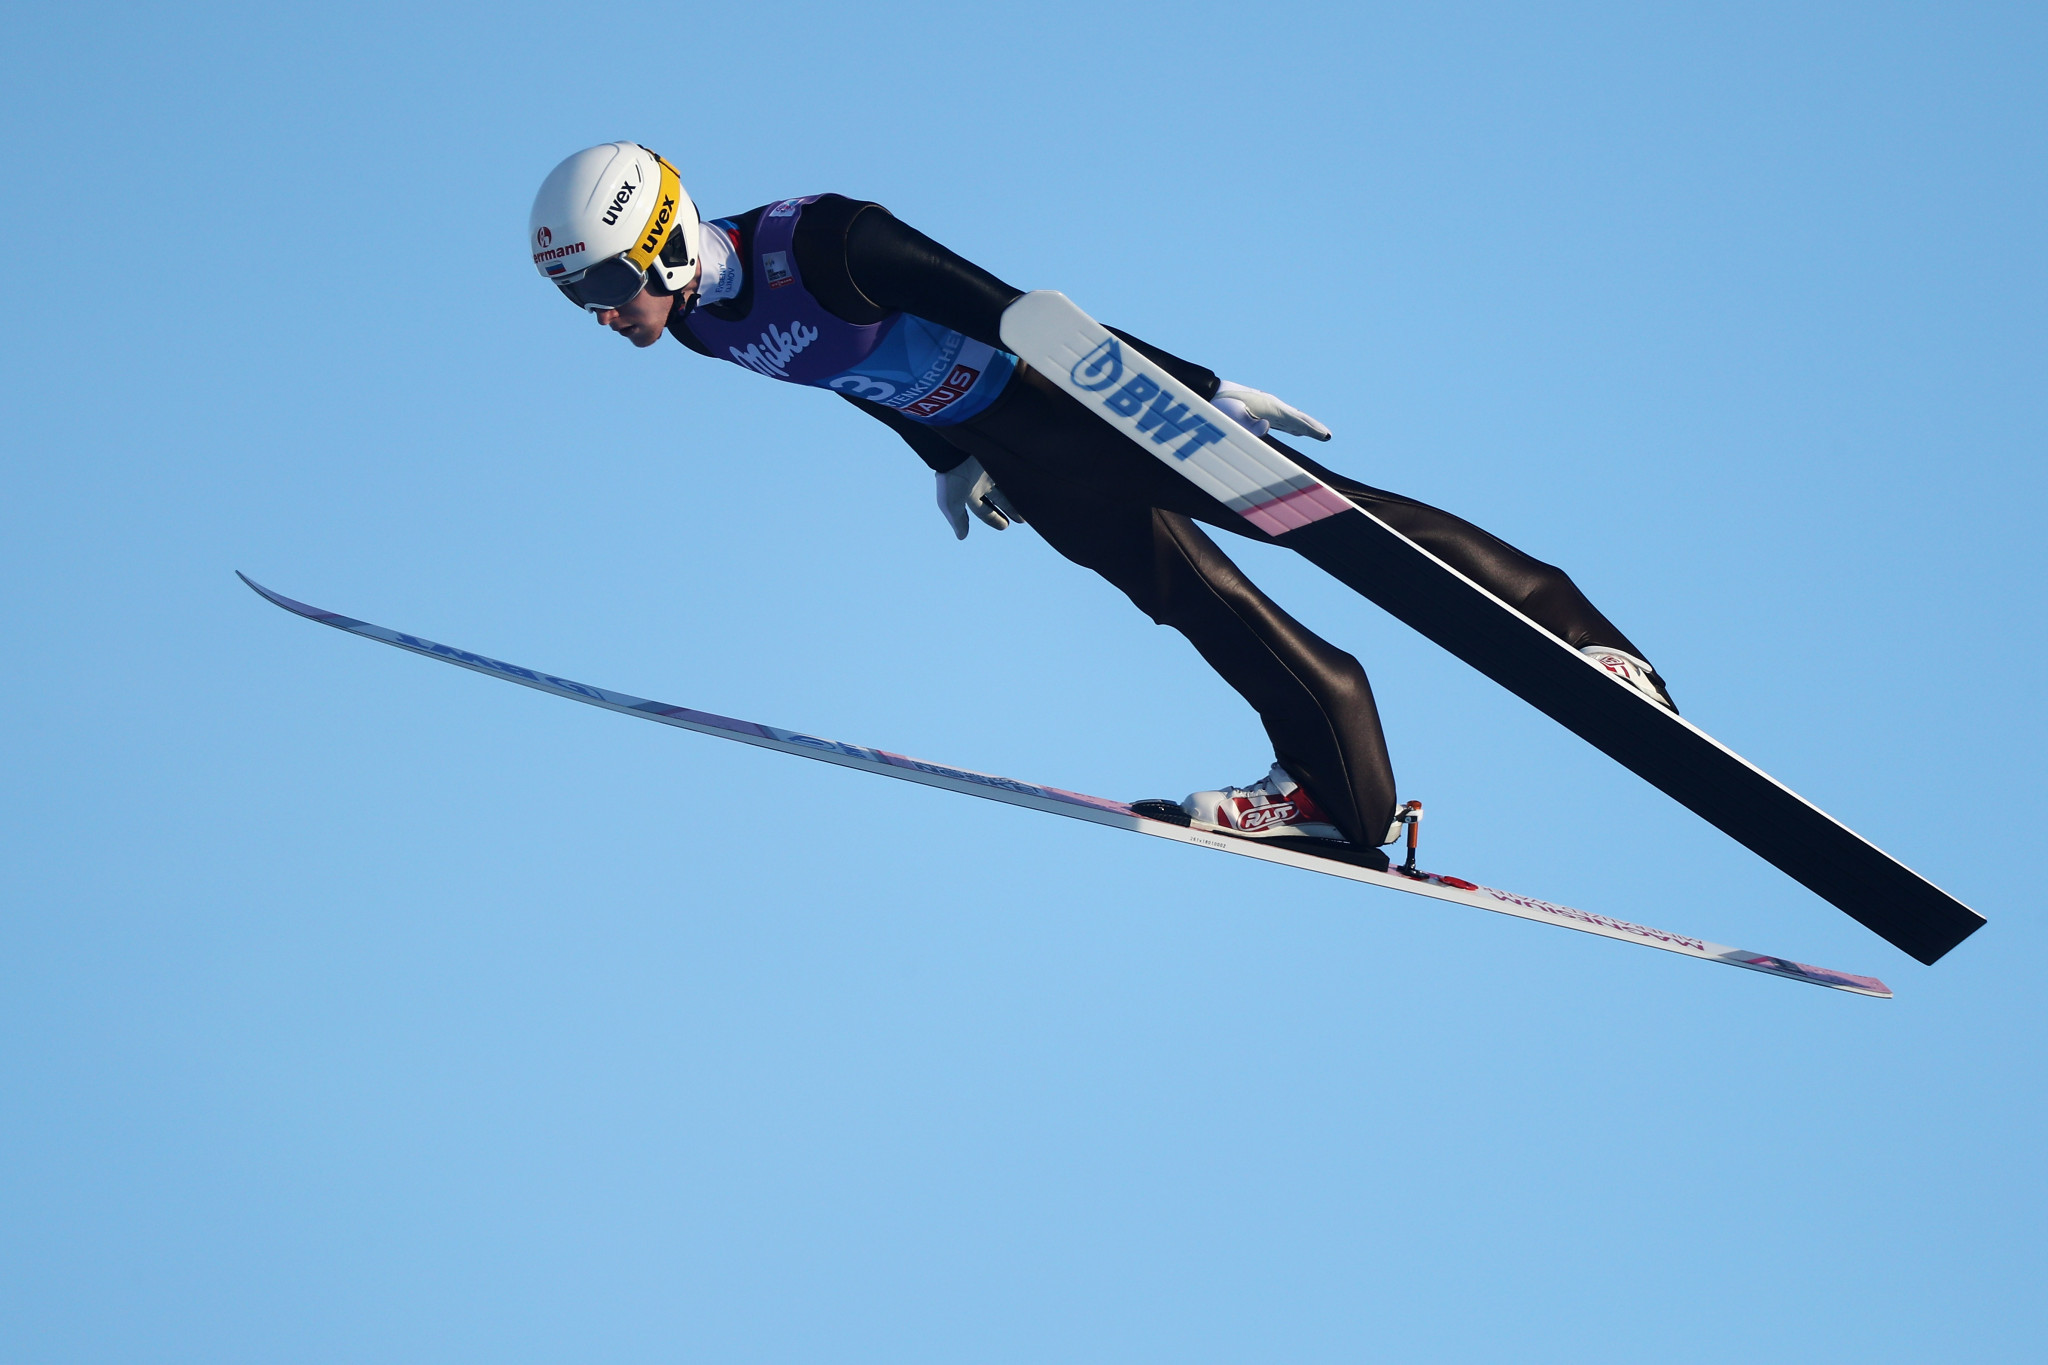 Russia's Evgeniy Klimov topped qualifying at the FIS Ski Jumping World Cup opener in Poland ©Getty Images